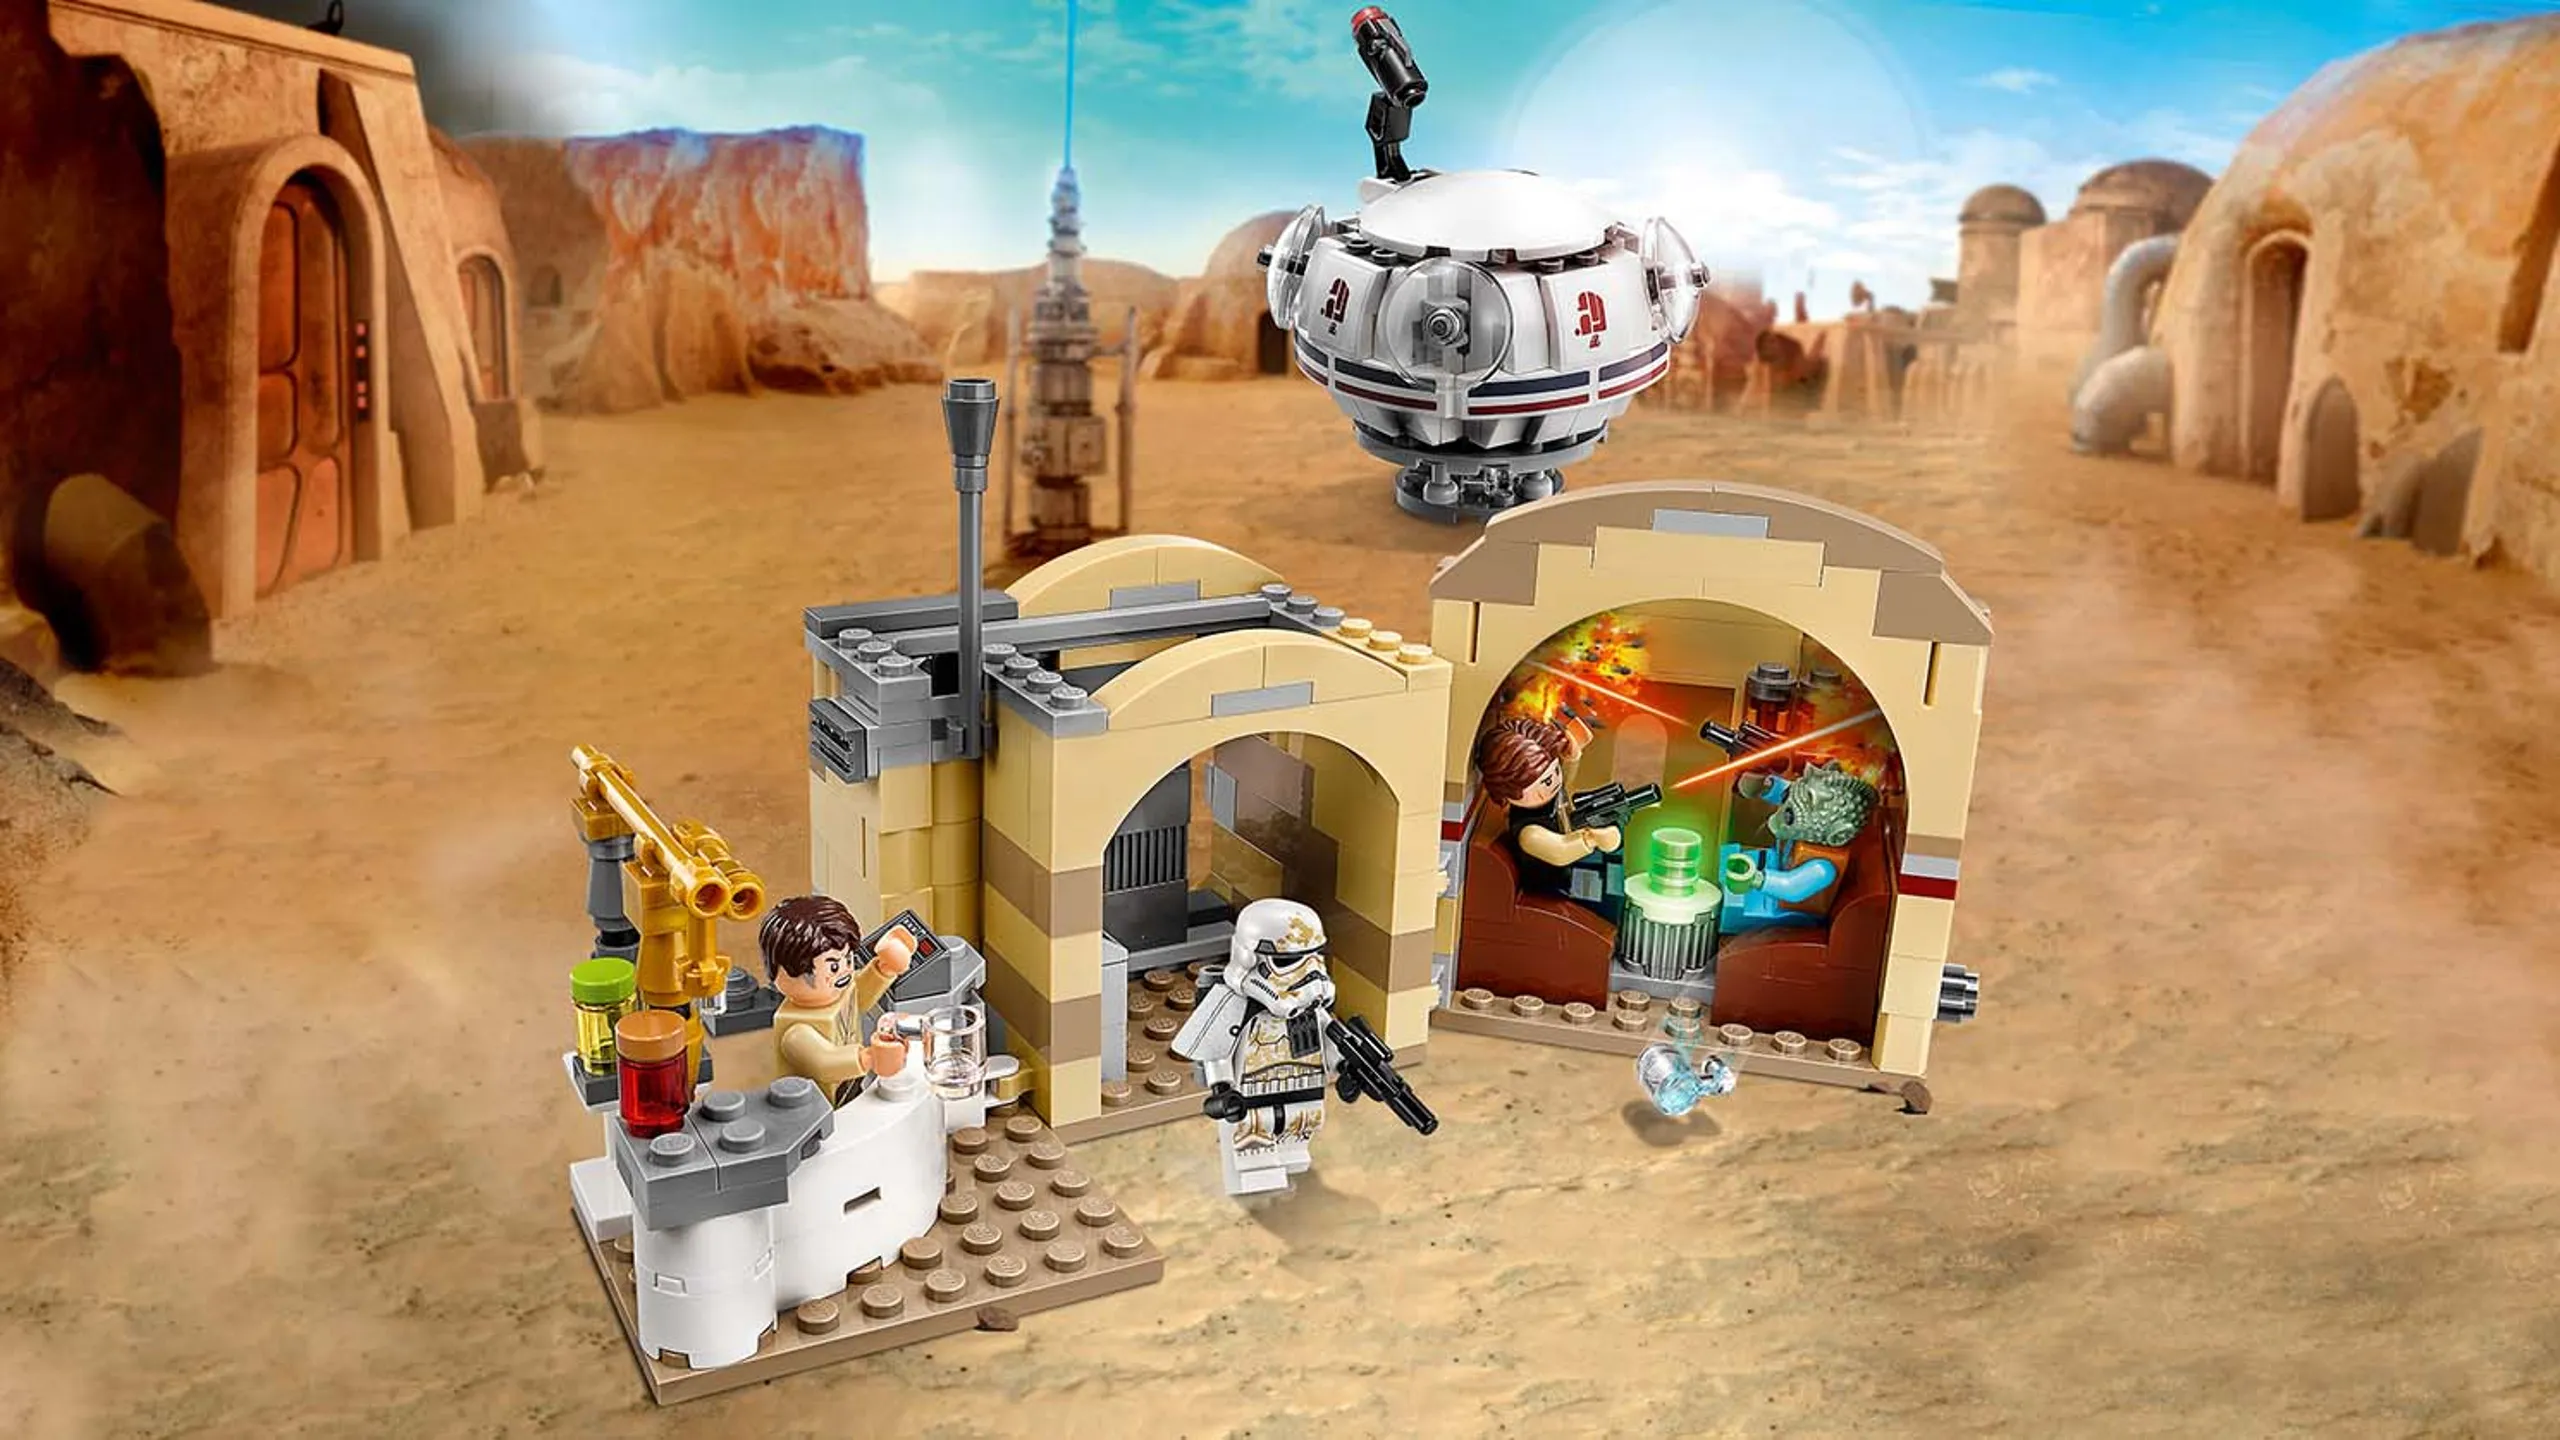 LEGO Star Wars Mos Eisley Cantina™ - 75205 - Han Solo, the Sandtrooper and Wuher are hanging out in Tatooine's most dangerous tavern, Mos Eisley Cantina.